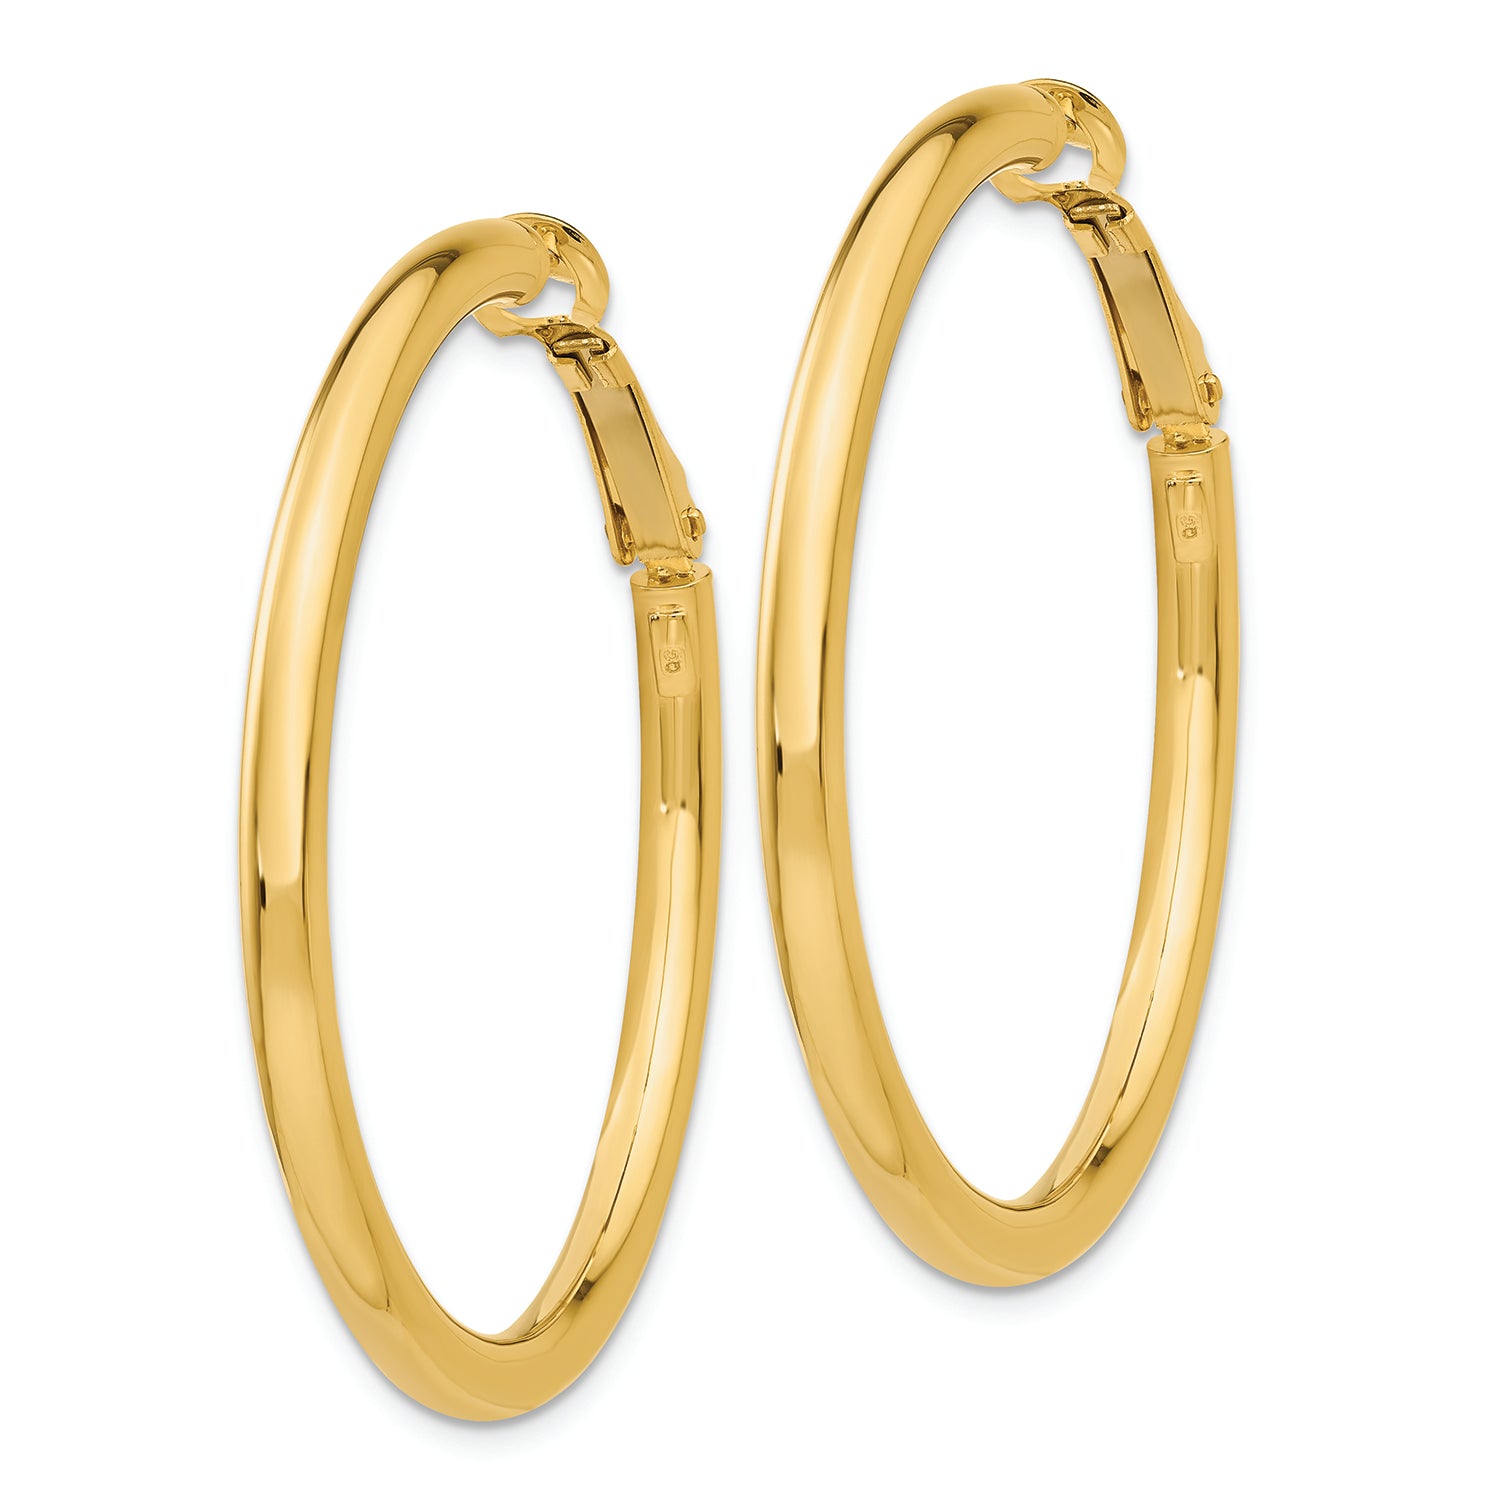 Buy Gold Plated Layered Round Hoop Earrings Online - W for Woman